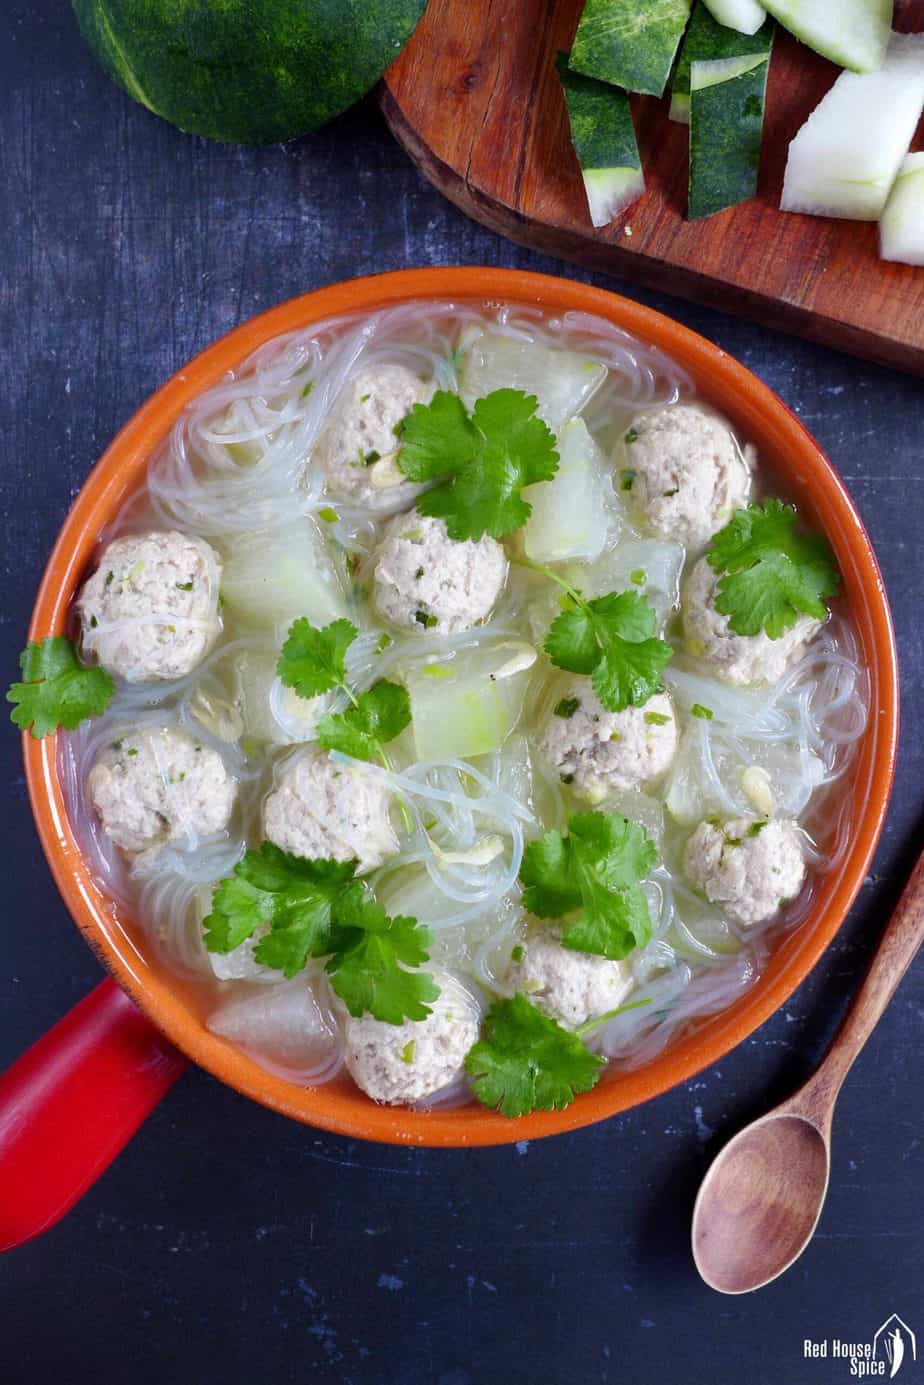 Winter melon cooked with meatballs and mung bean vermicelli.